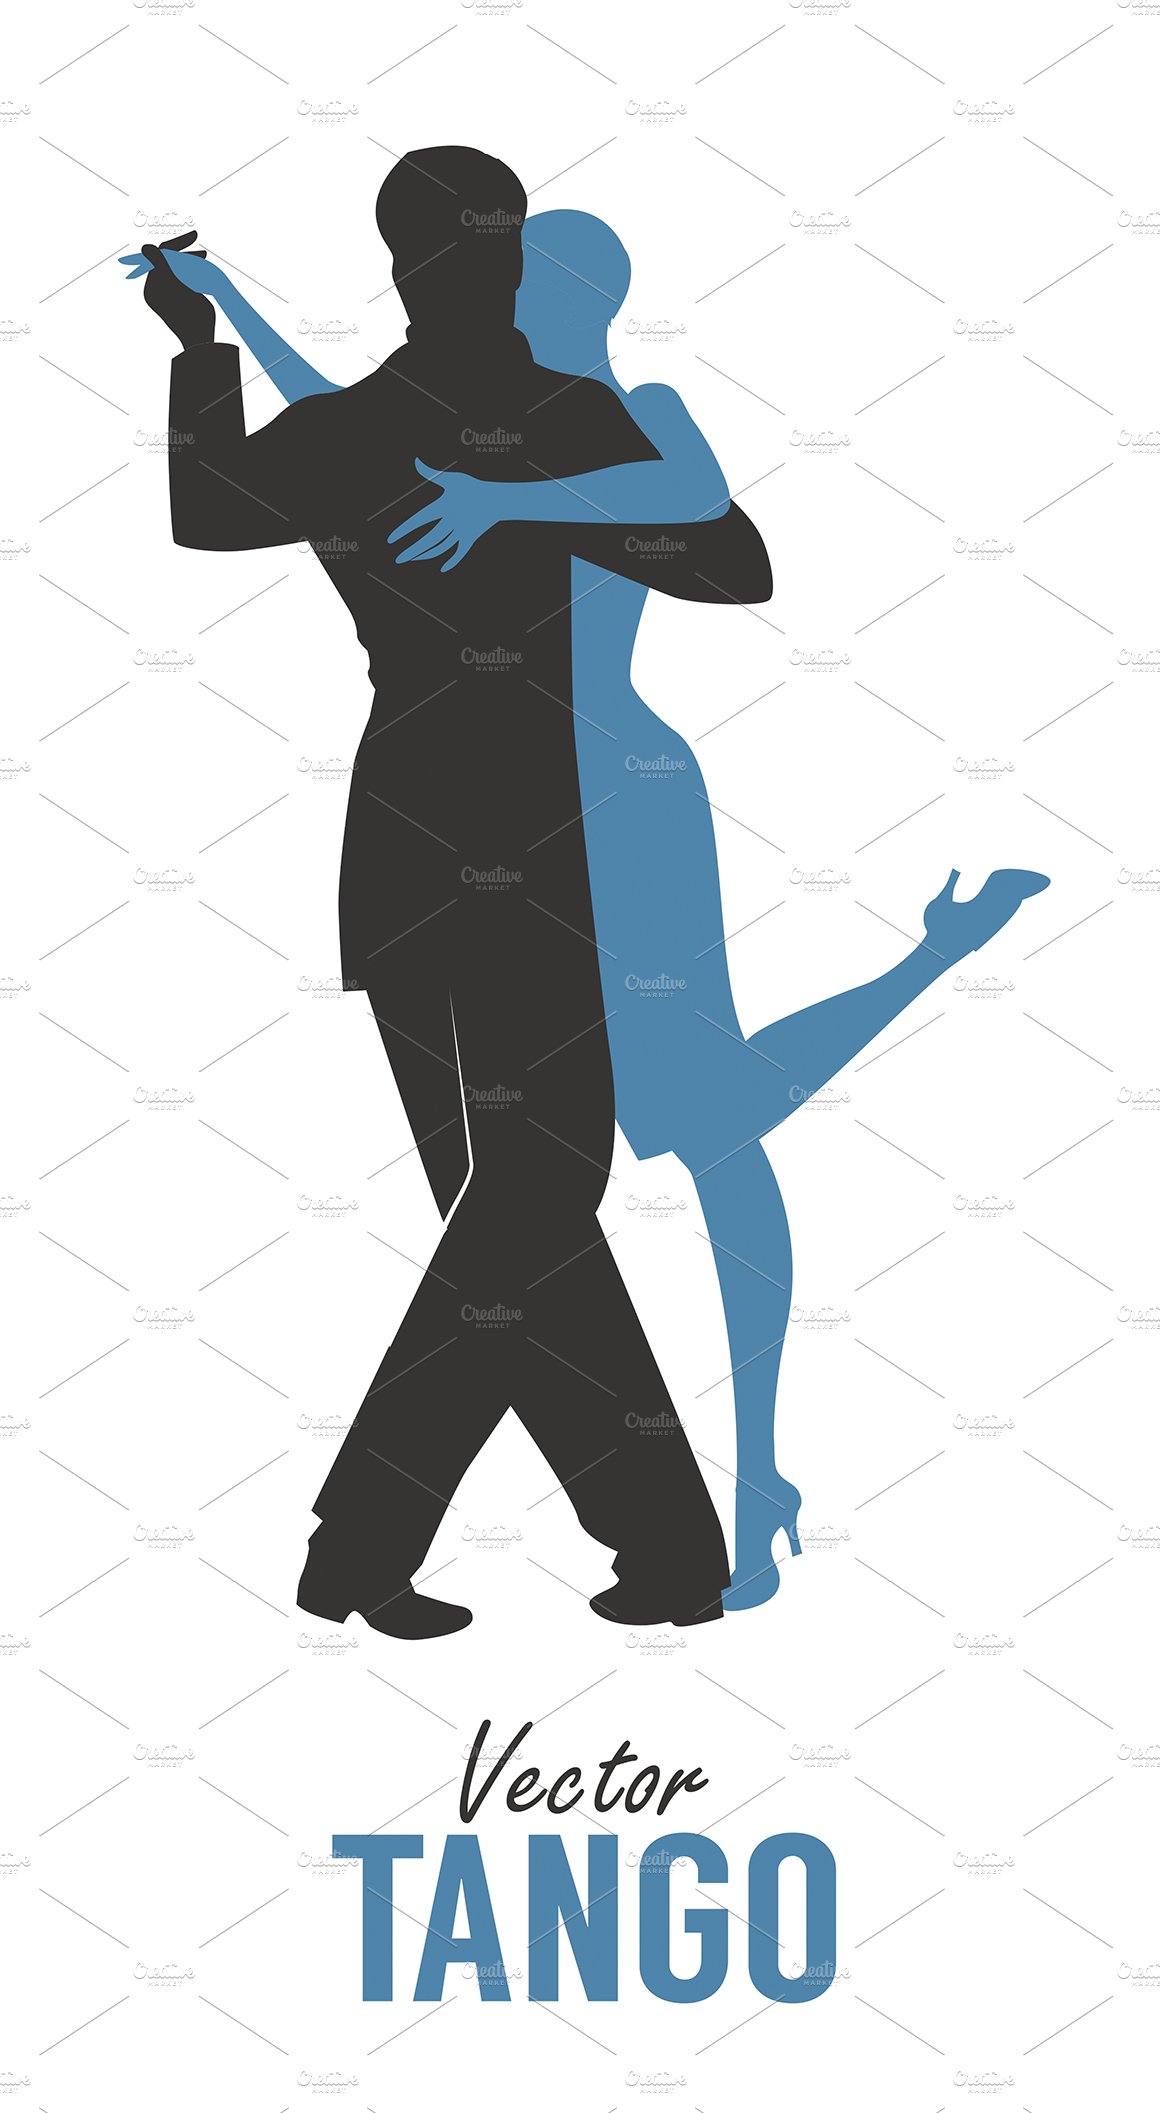 Three couples dancing tango preview image.